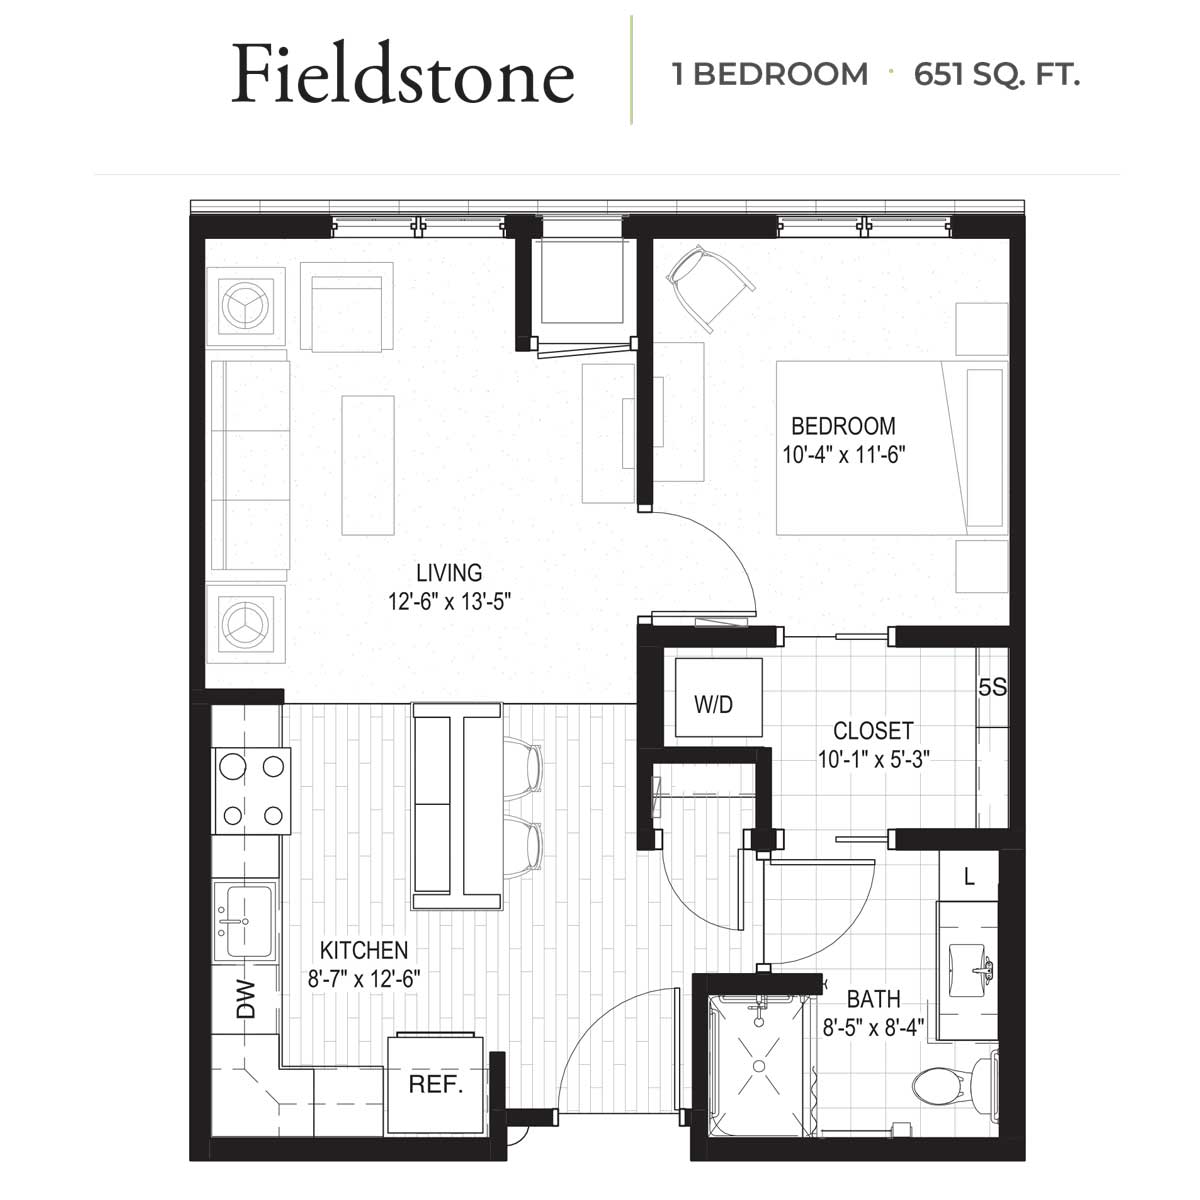 Floor plan of the 1-bedroom Fieldstone apartment with a total area of 651 square feet